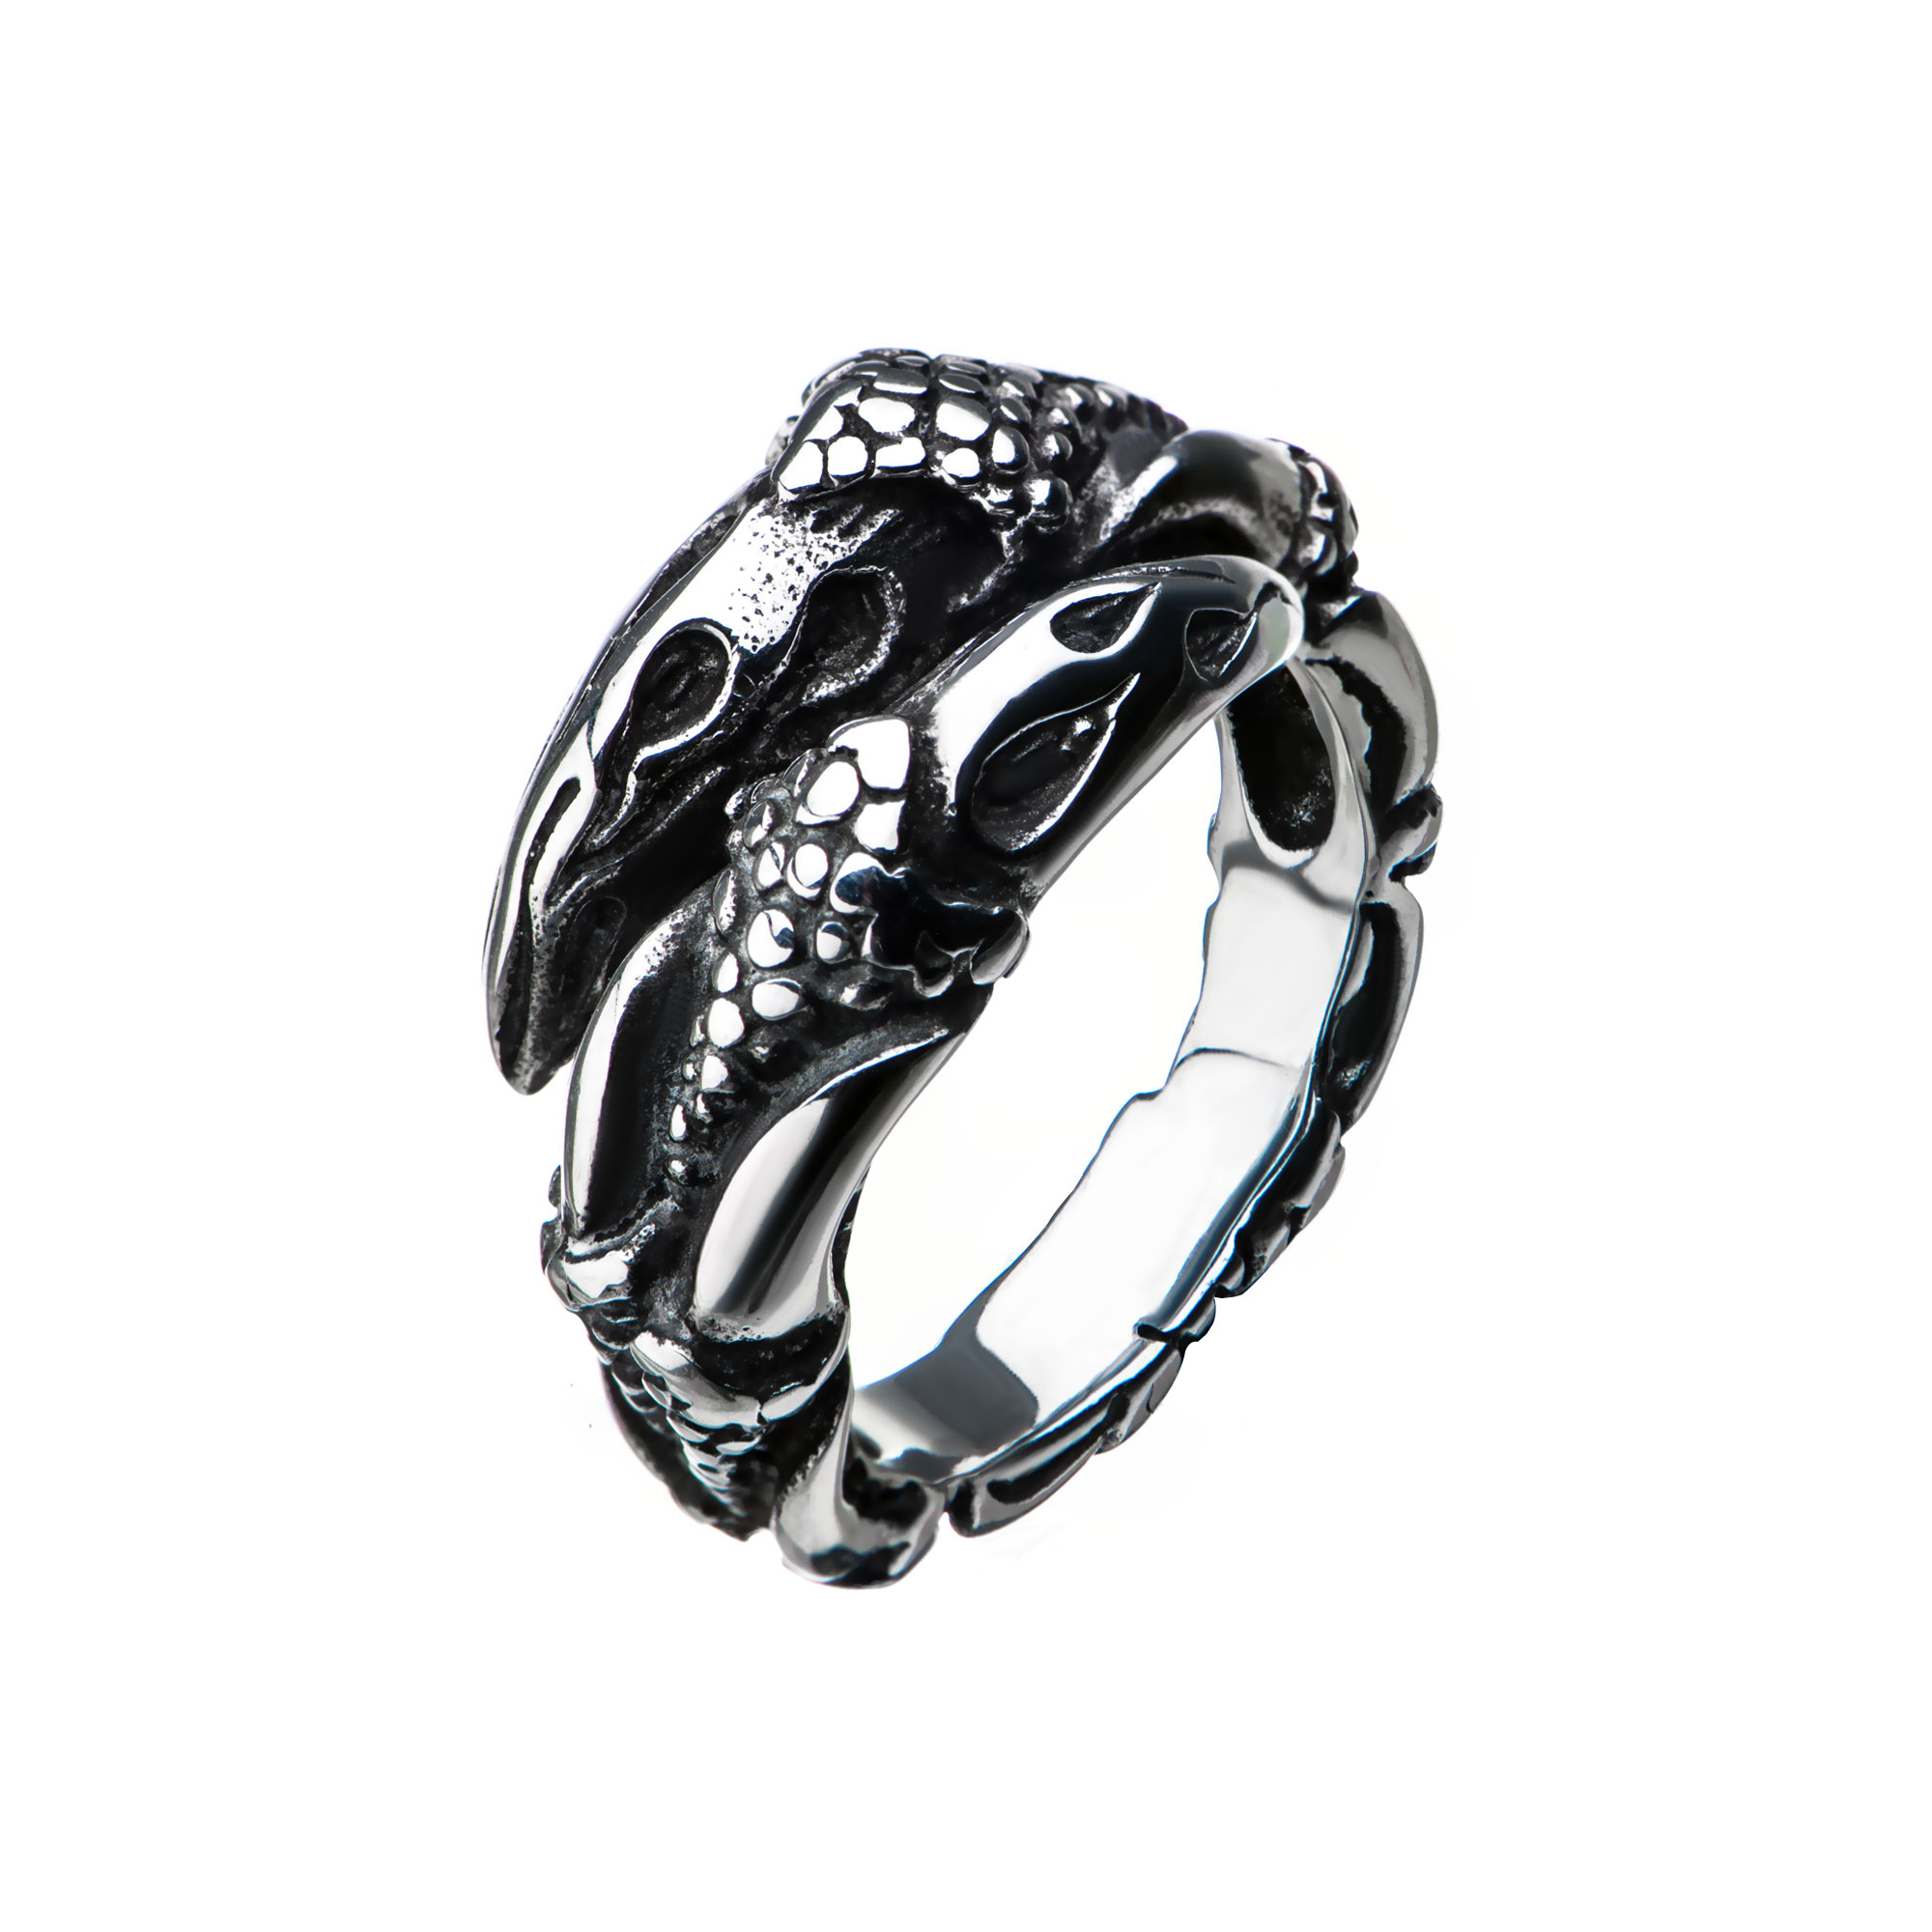 Steel & Black Plated Oxidized Claw Ring Thurber's Fine Jewelry Wadsworth, OH